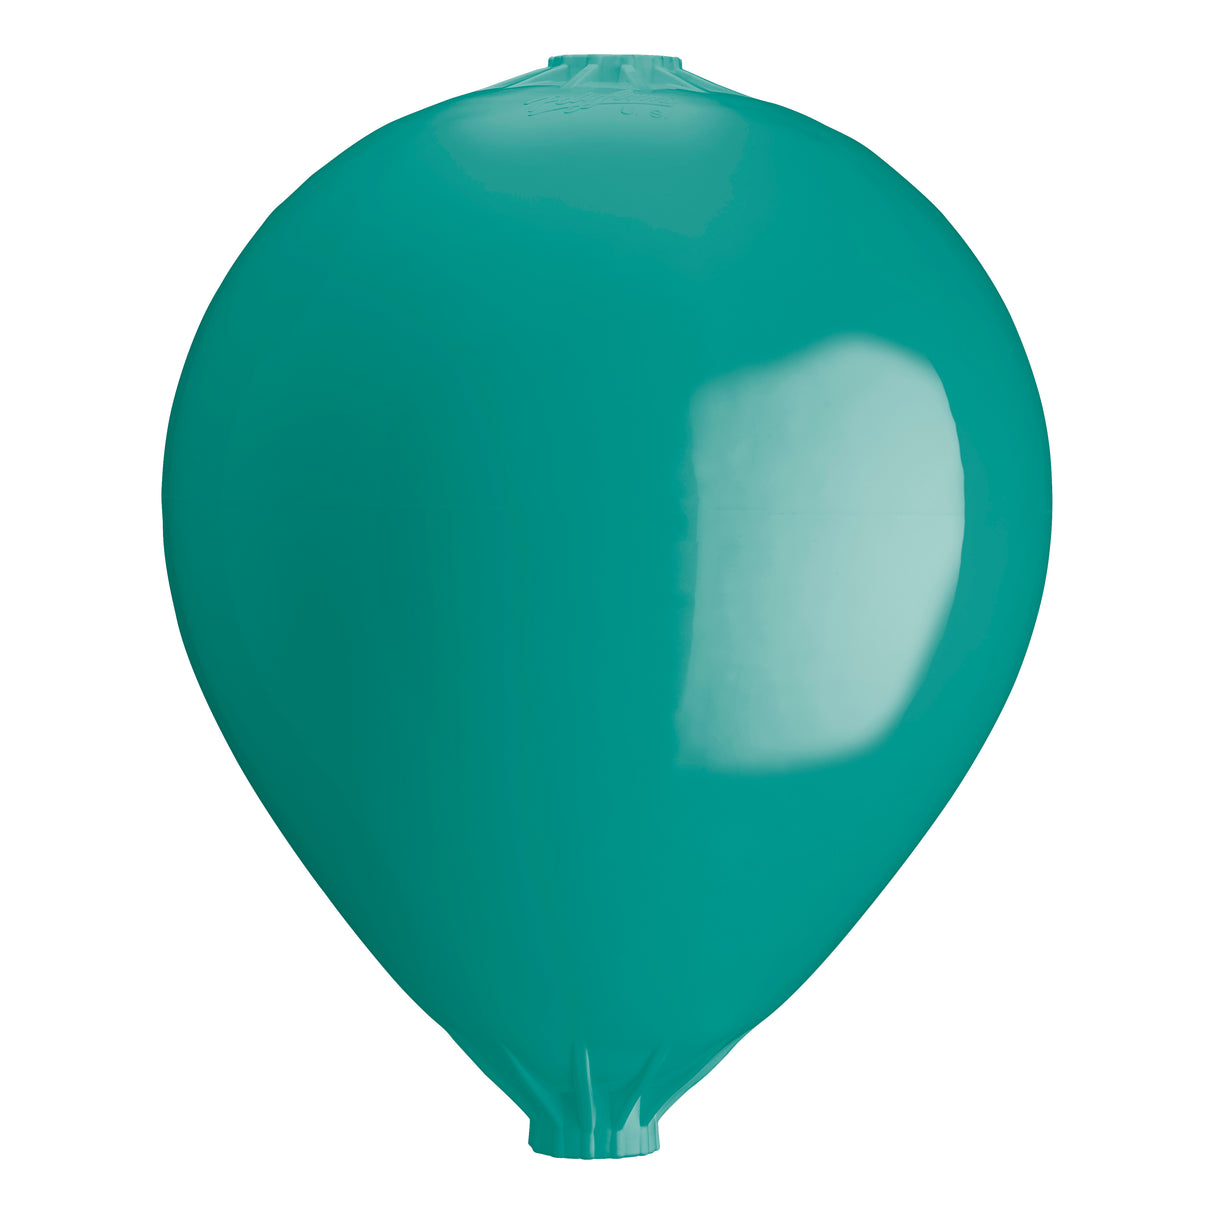 Hole through center mooring and marker buoy, Polyform CC-5 Teal